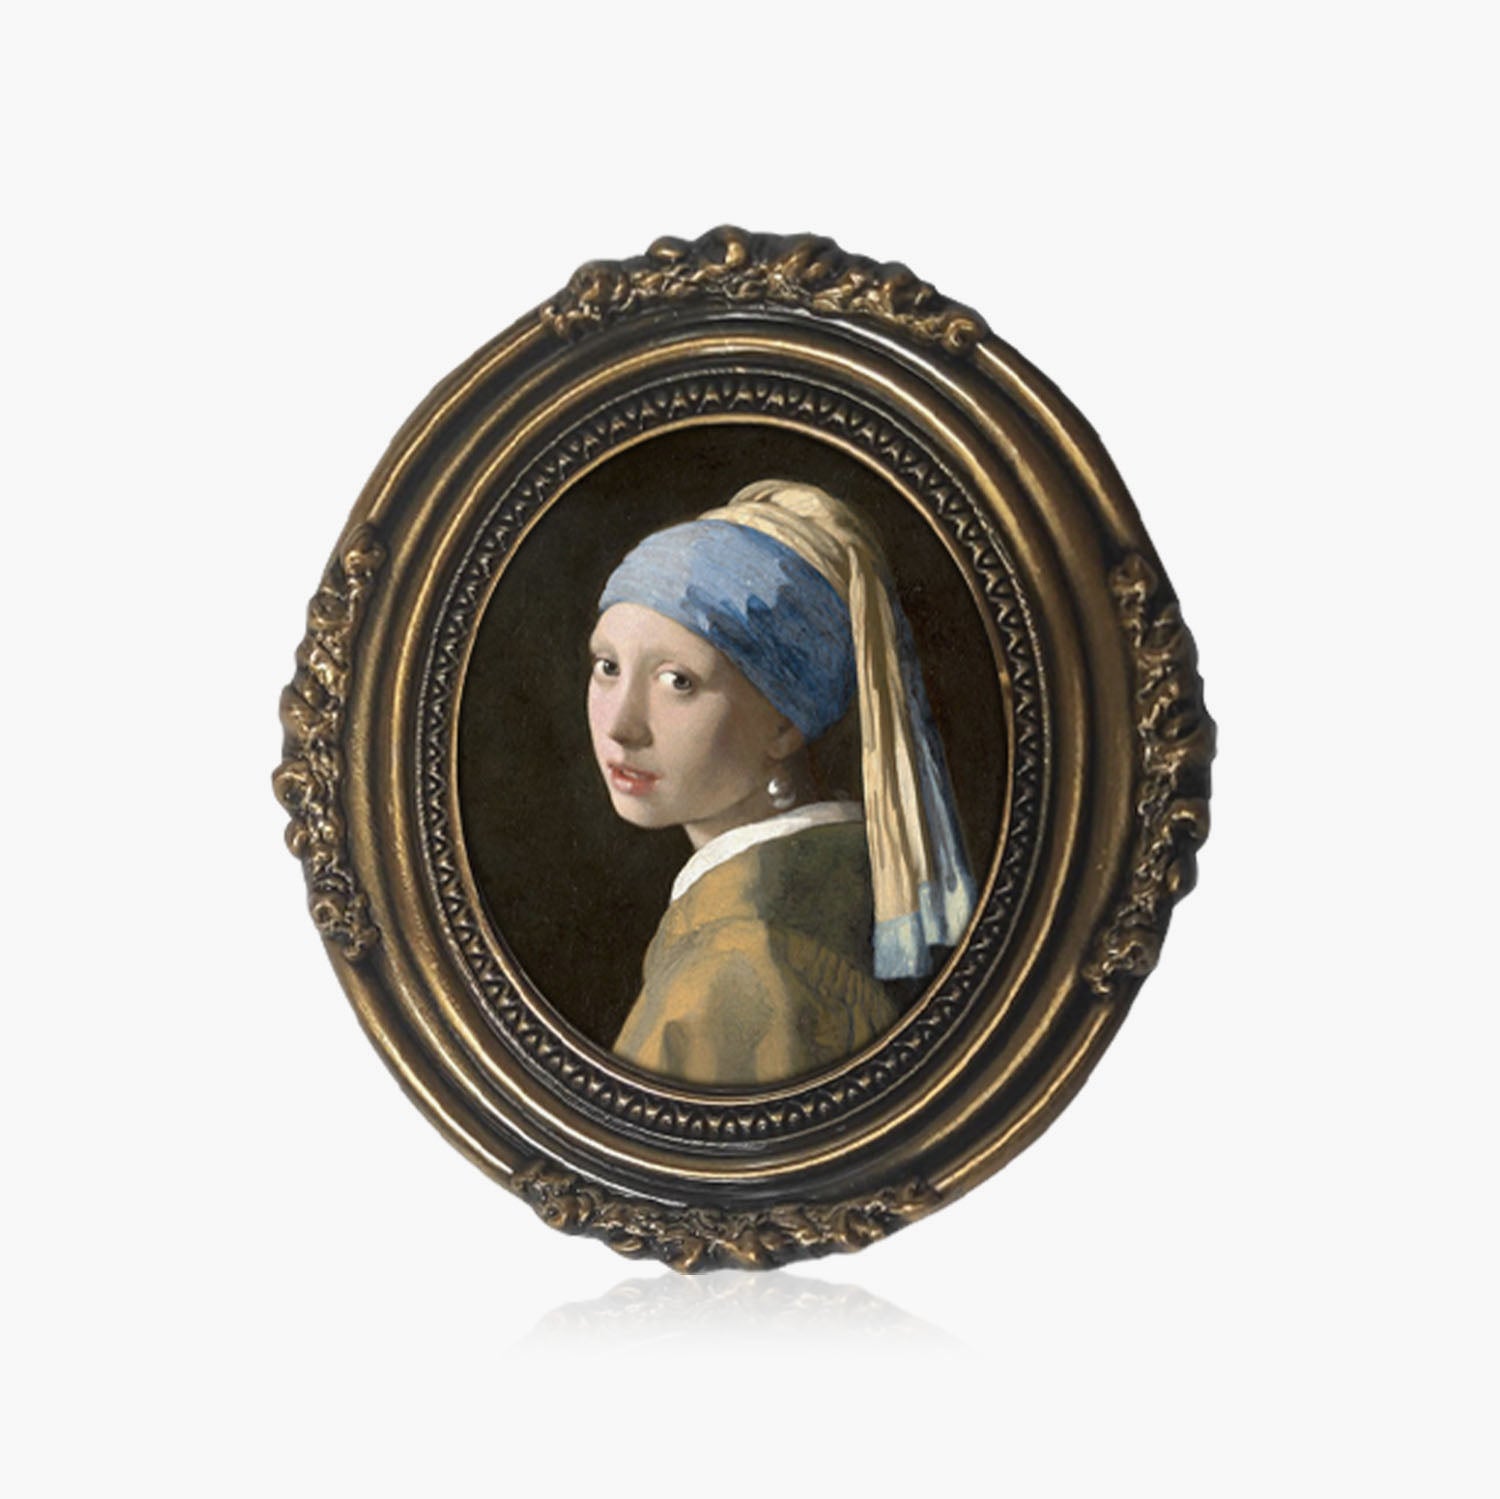 The Most Famous Paintings - Johannes Vermeer - Girl with a Pearl Earring